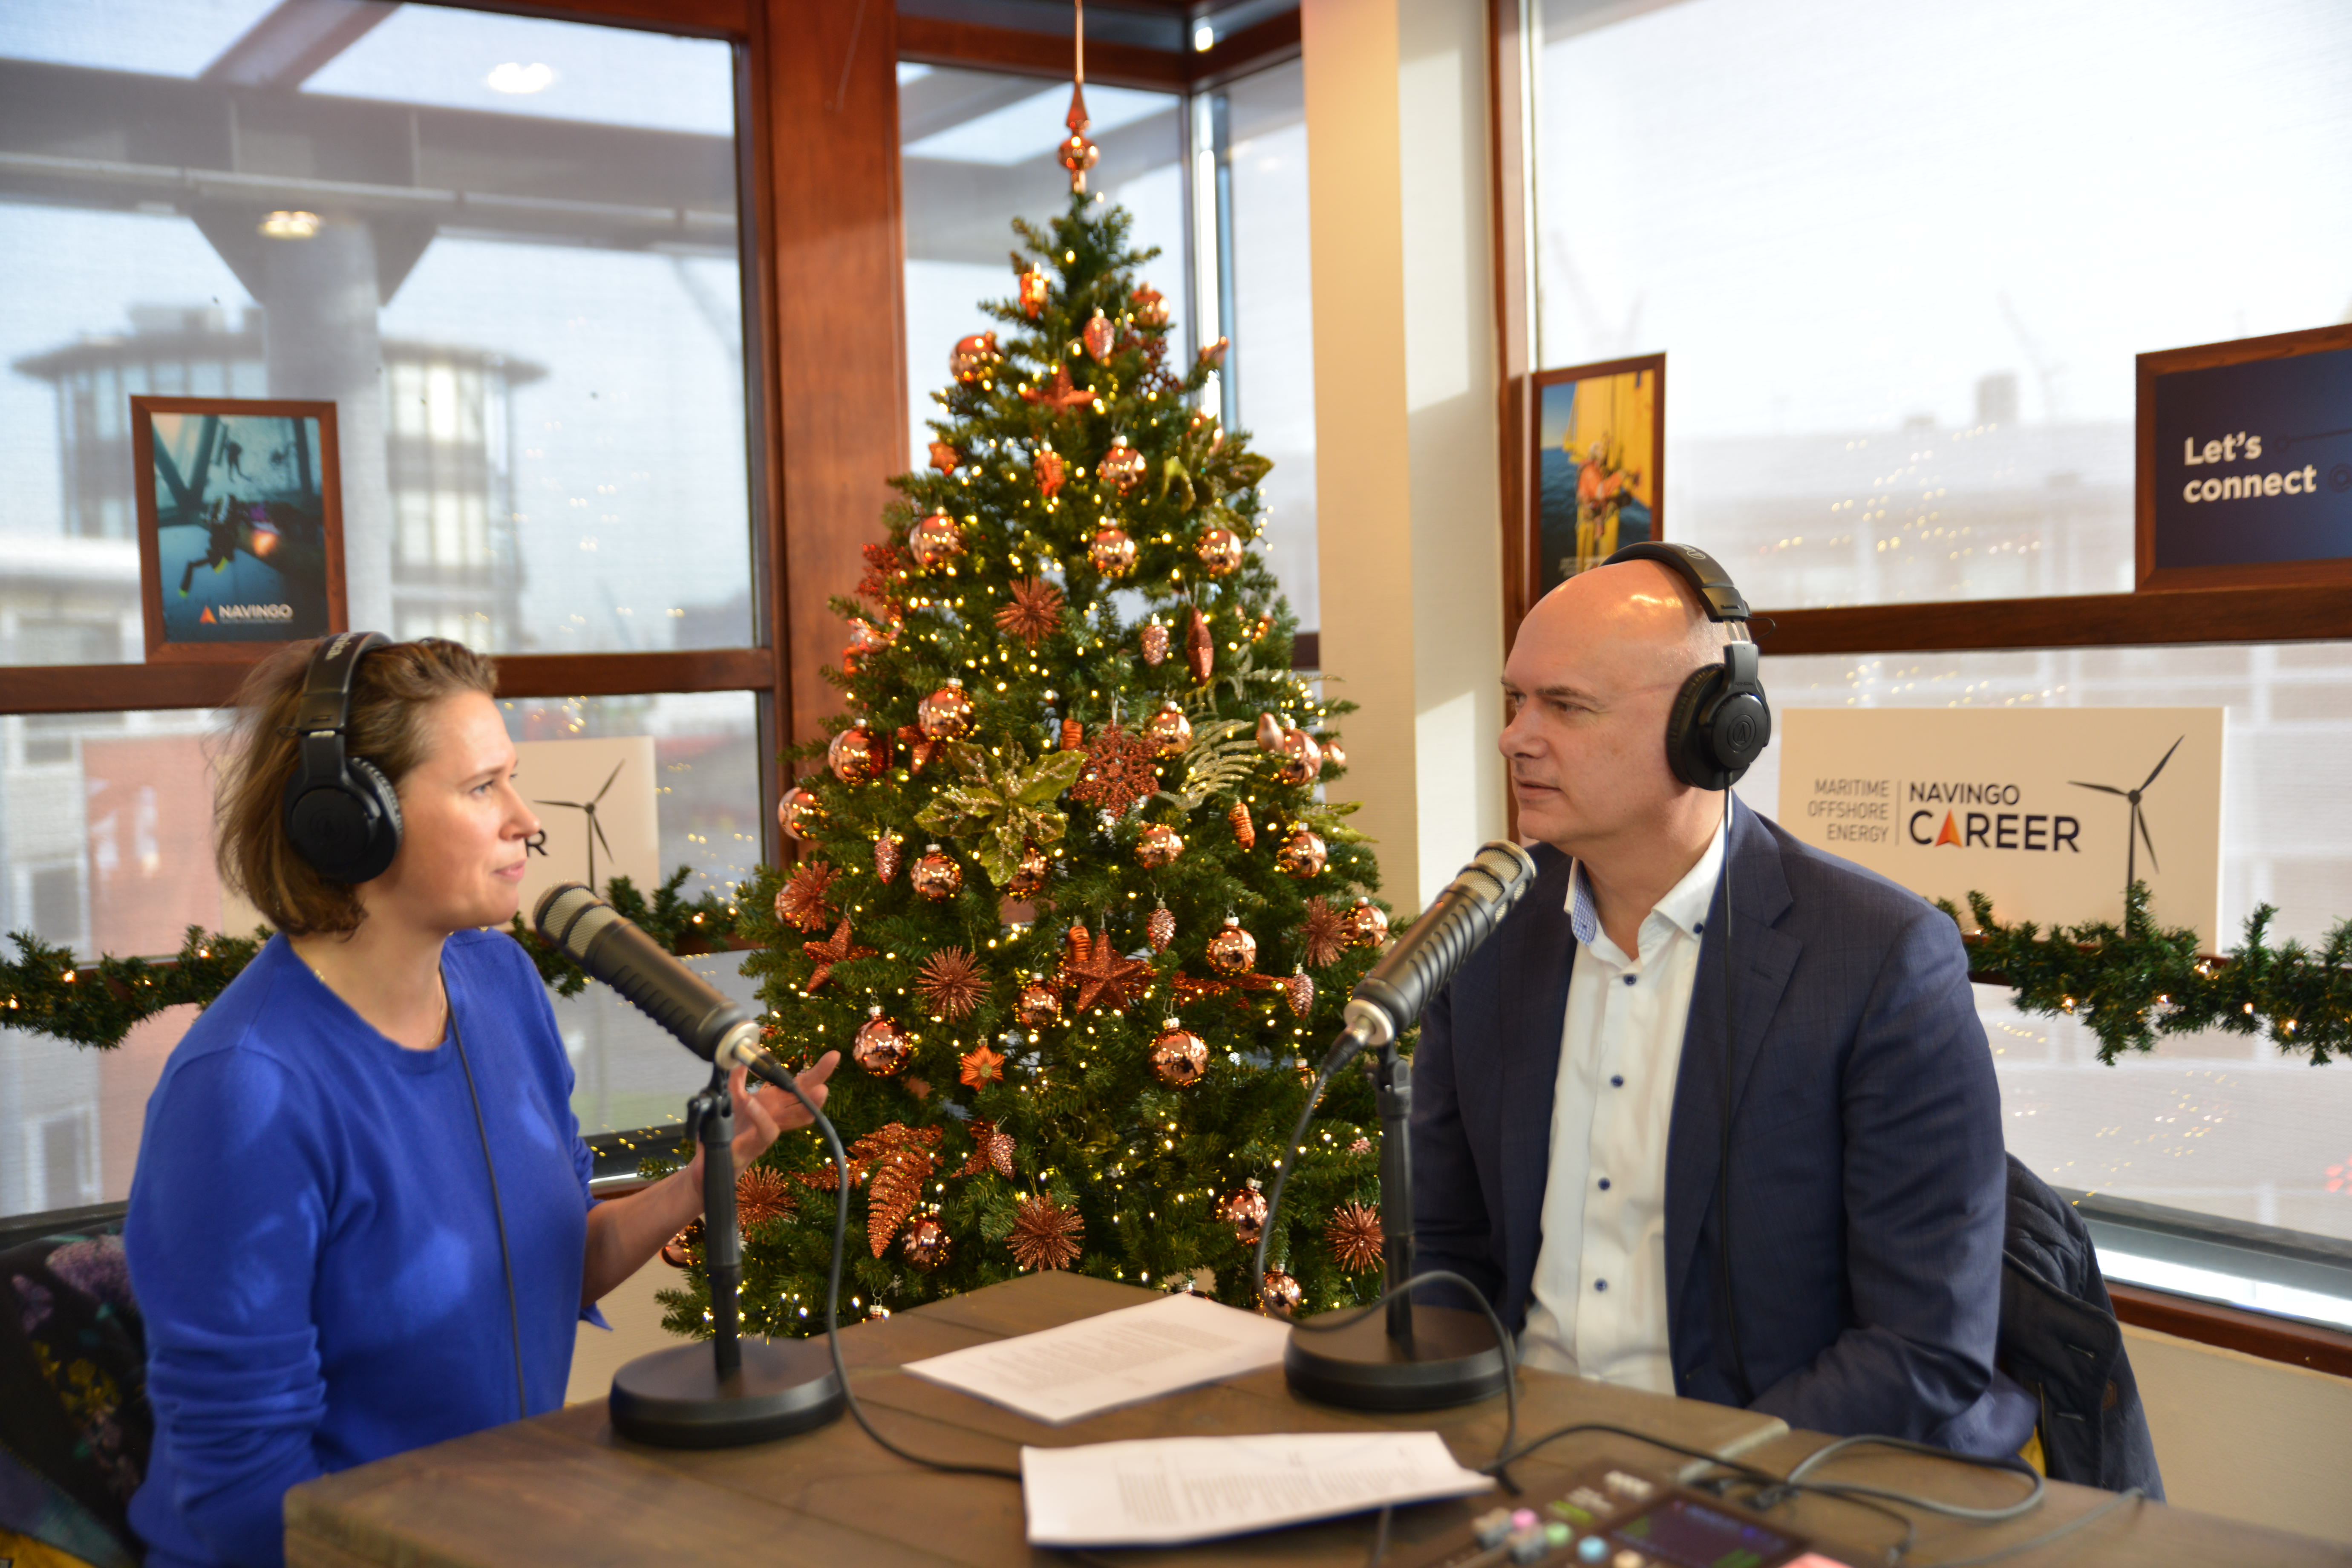 Lex de Groot, Managing Director of Neptune Energy Netherlands, together with Coco Kossmann in the Navingo Career Podcast.